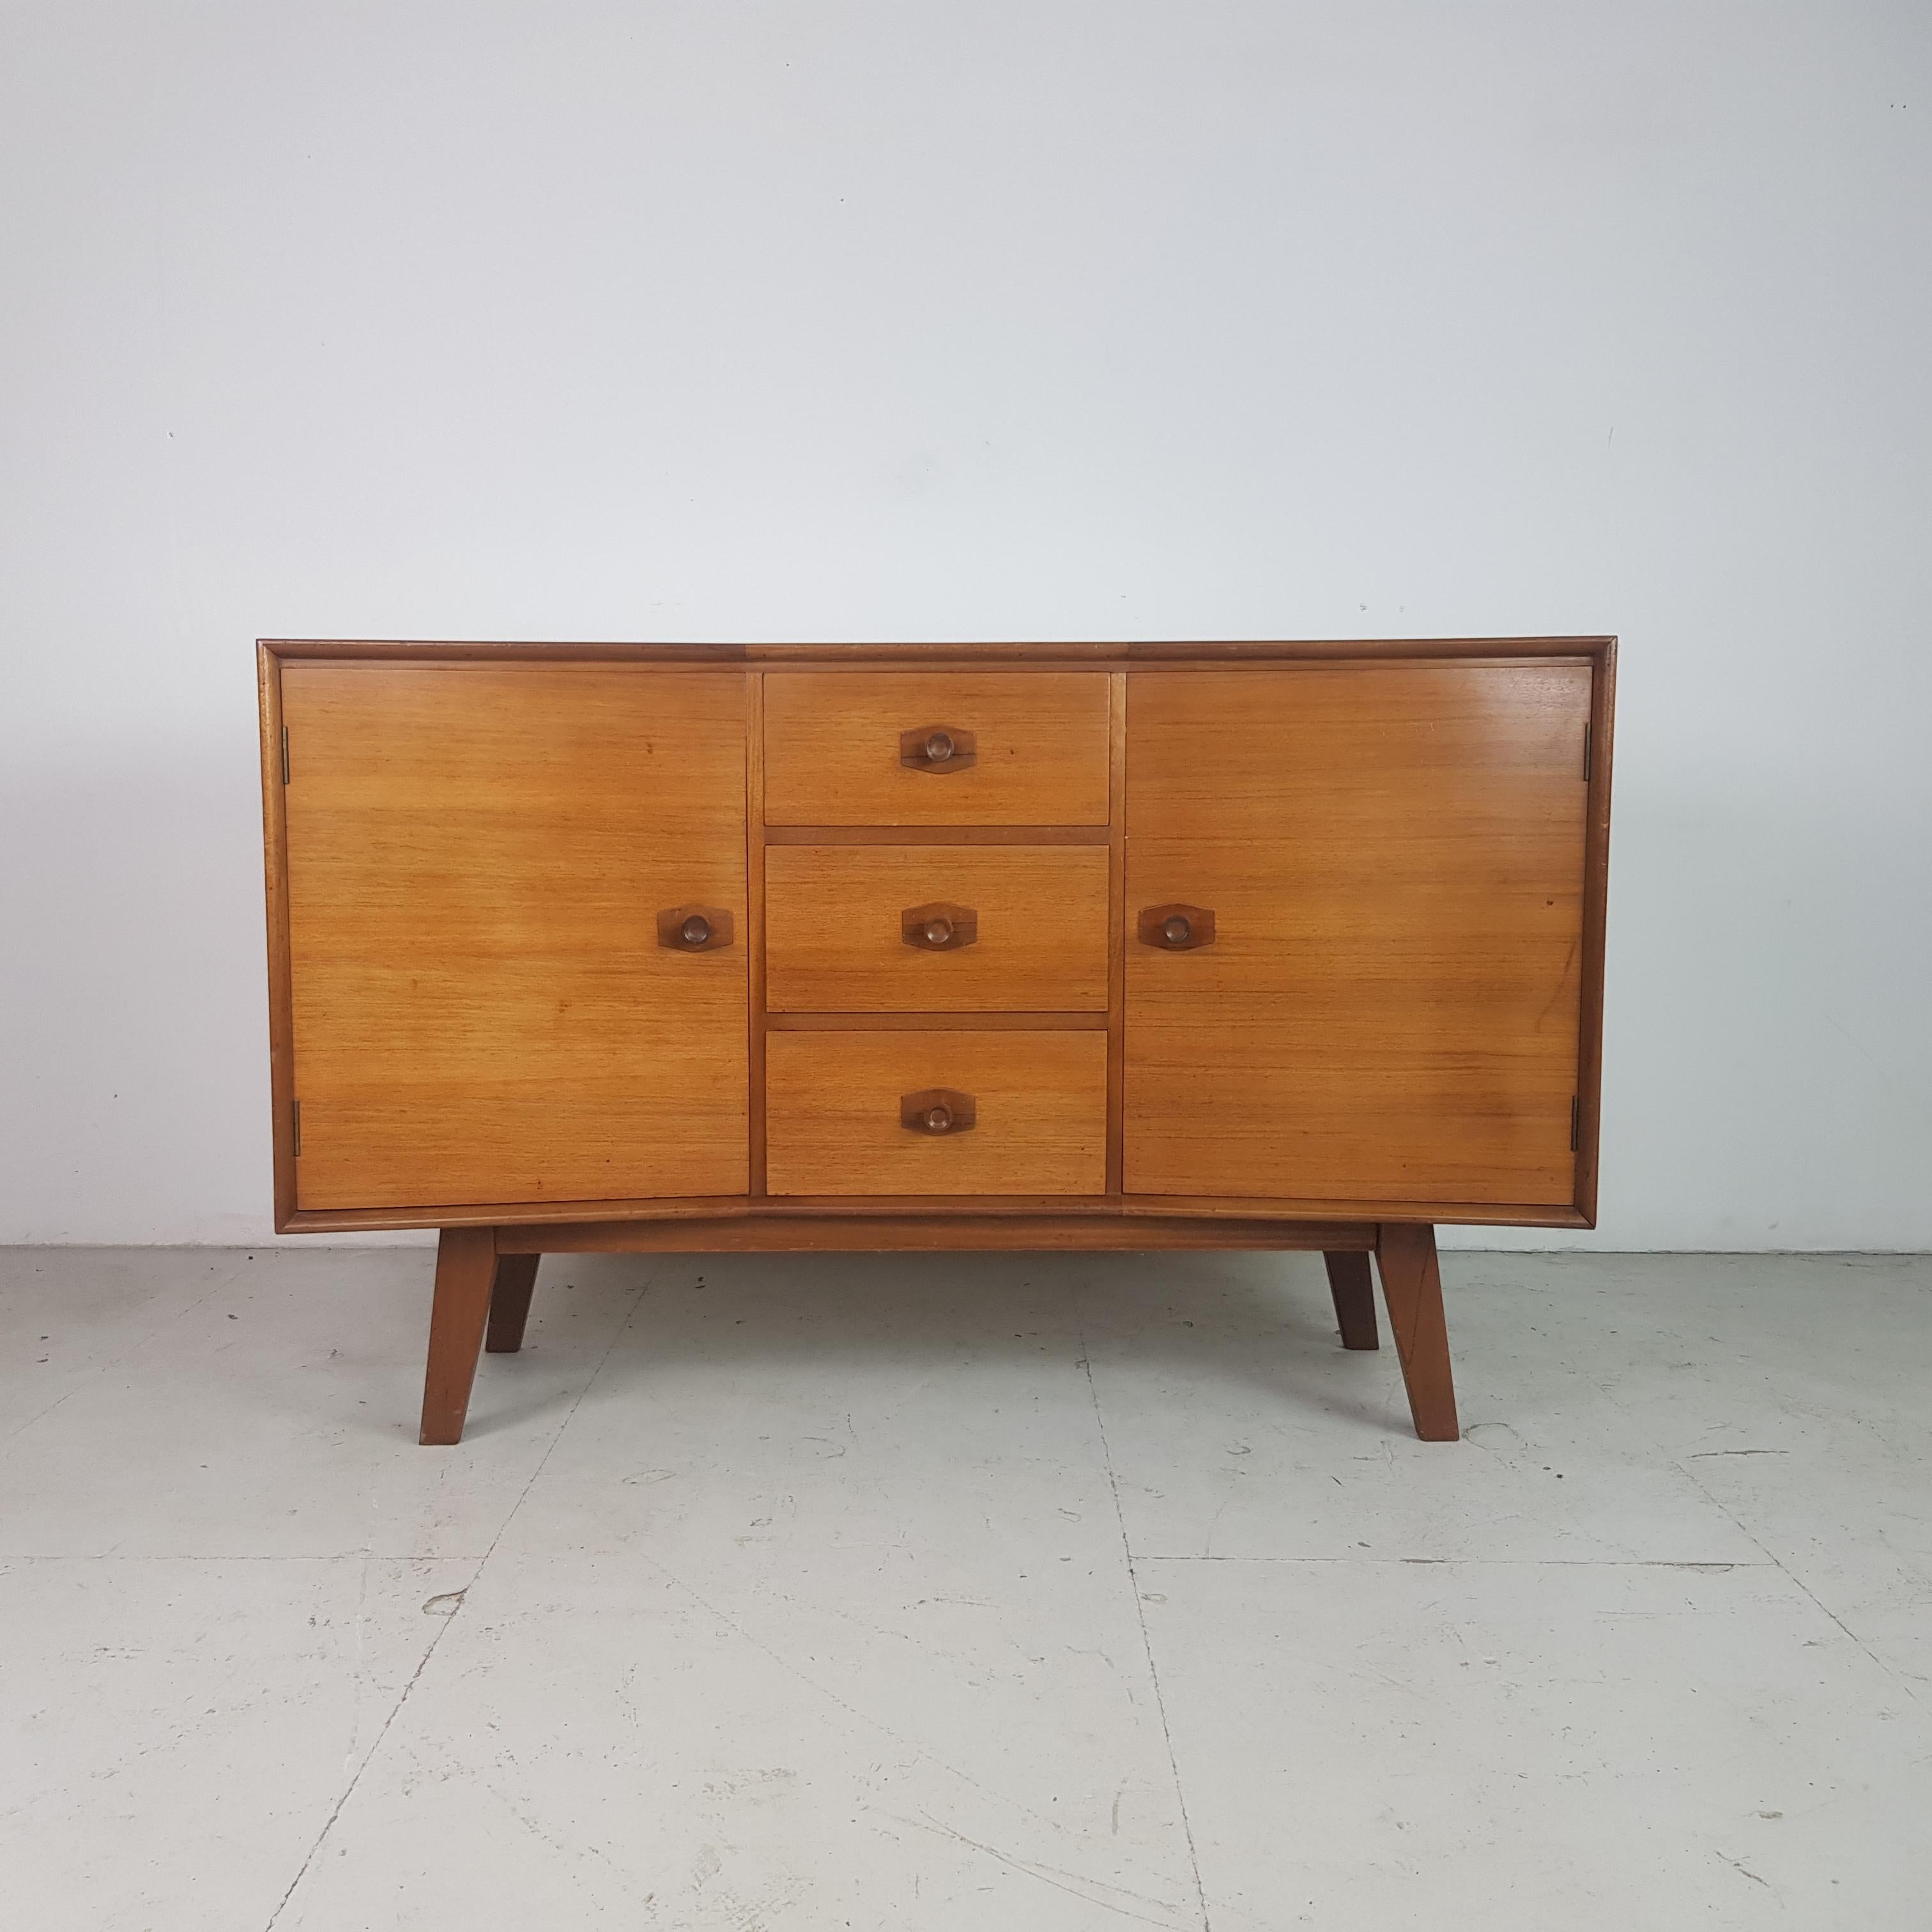 Lovely midcentury teak sideboard from heals with lovely angles.
In good vintage condition - it has been sanded and oiled.

Approximate dimensions:

Width 137cm

Depth 47cm

Height 87cm

Cupboards: 47cm x 36cm x 28cm.

Drawers: 33cm x